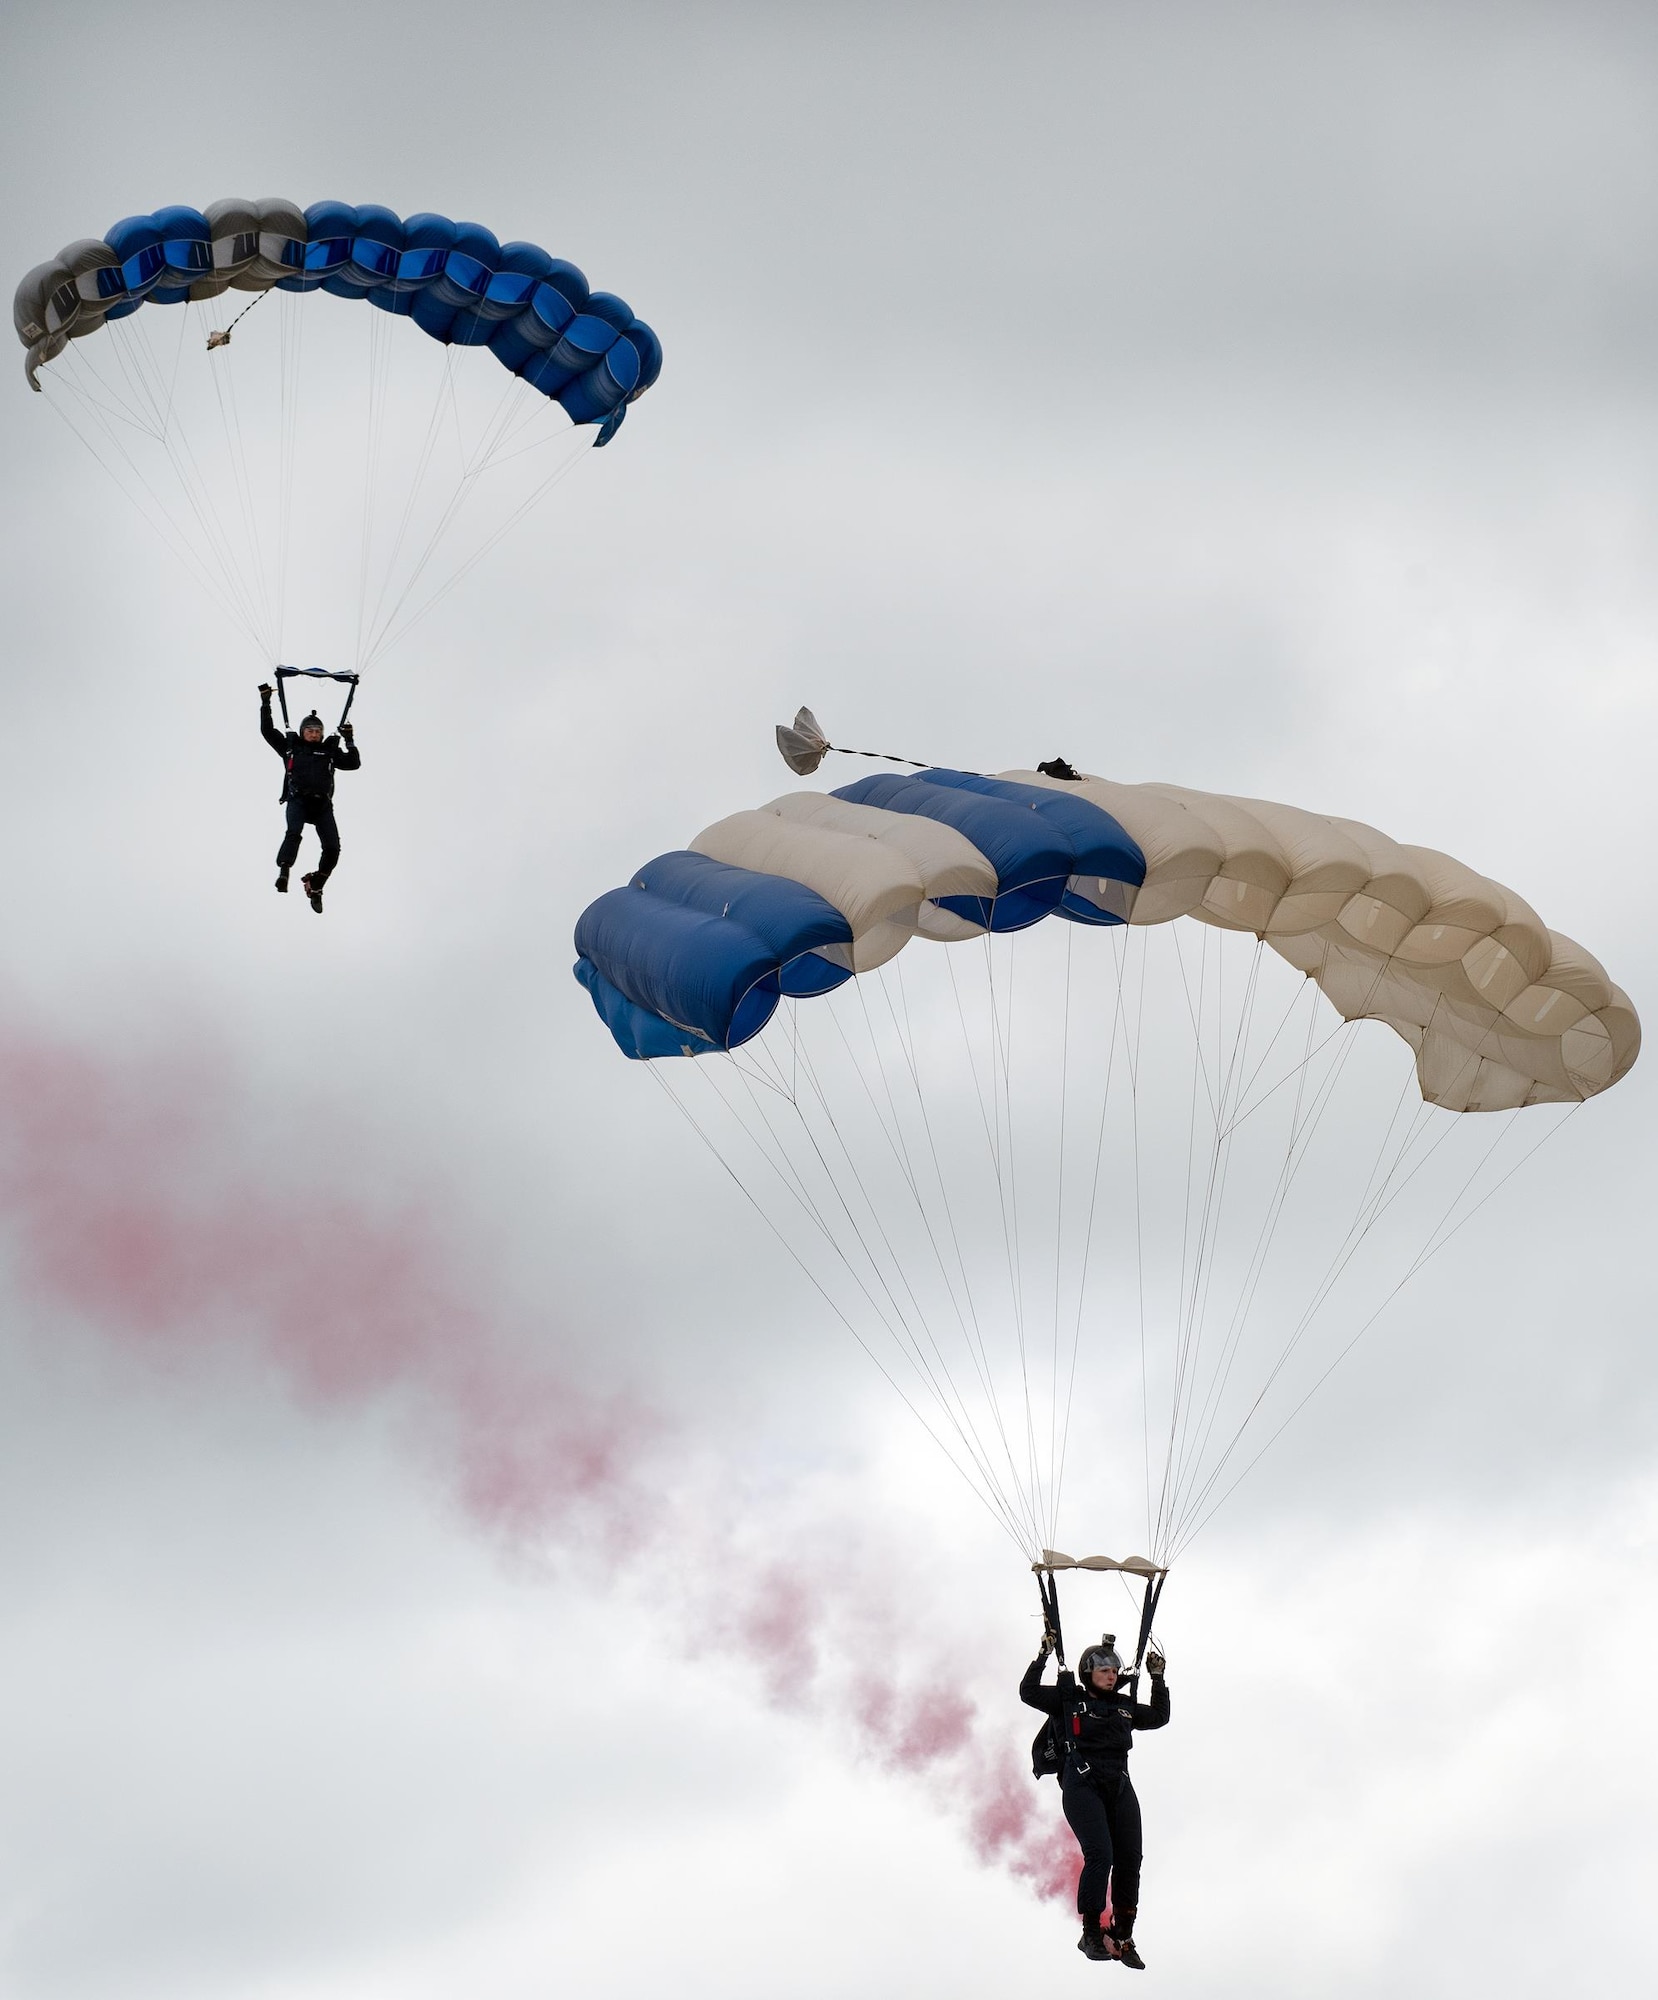 Members of the U.S. Air Force Academy Wings of Blue perform skydiving maneuvers during the Wings Over Solano Air Show at Travis Air Force Base, Calif., May 6, 2017. The two-day event featured performances by the U.S. Air Force Thunderbirds aerial demonstration team, flyovers and static displays. (U.S. Air Force photo by Louis Briscese)